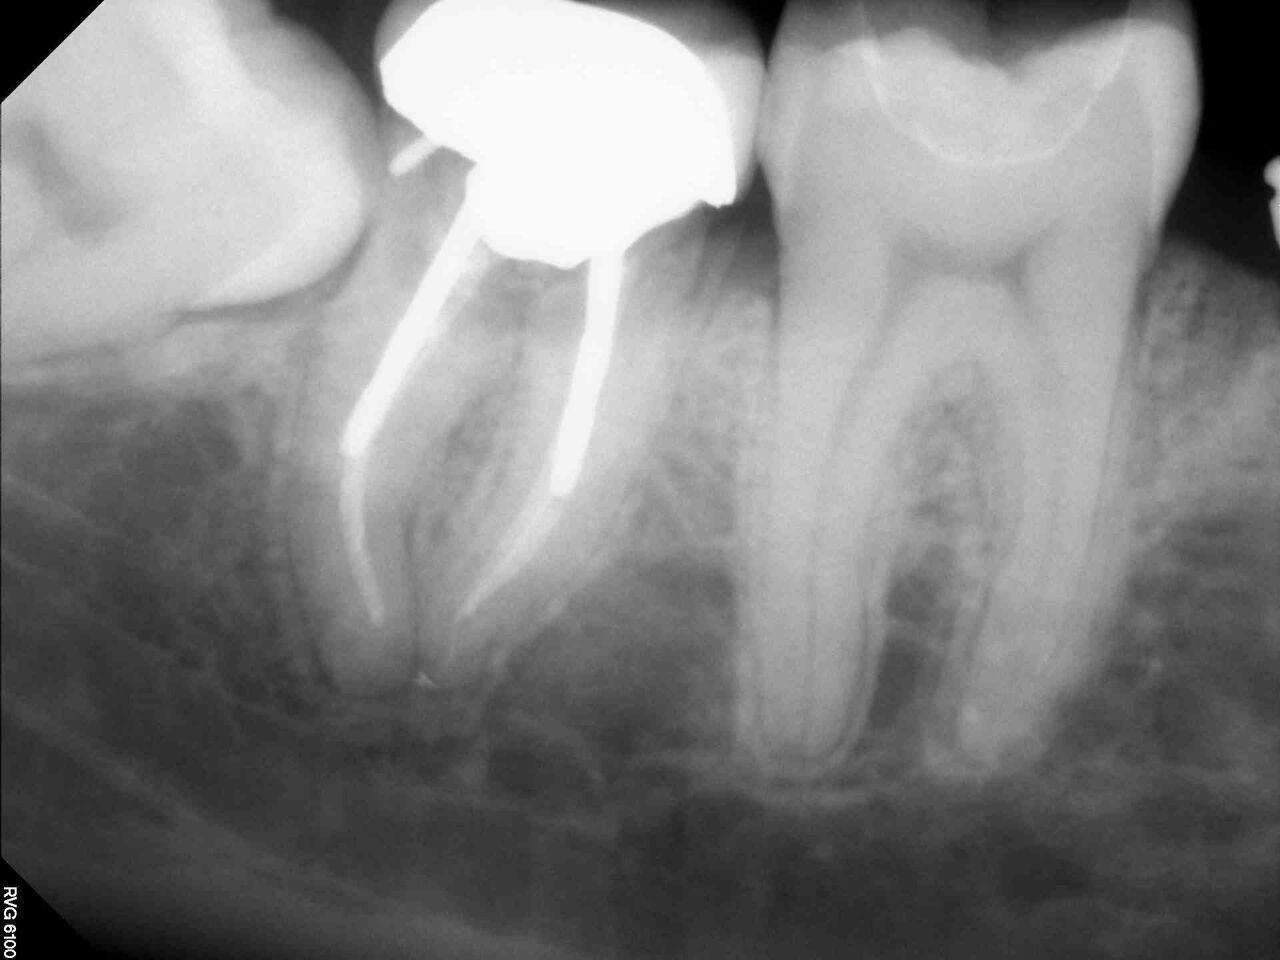 Is root canal treatment painful? Image of a root canal treatment X-ray.